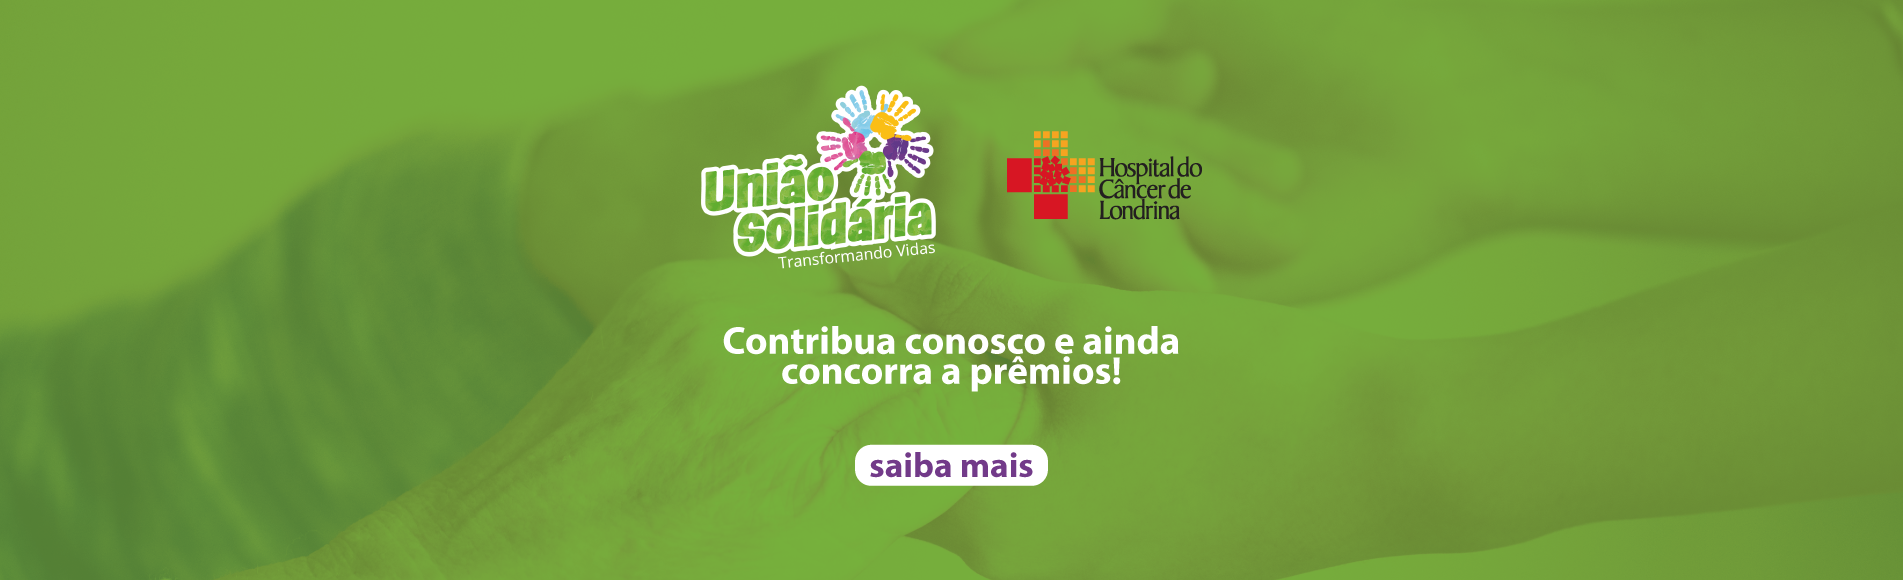 Banner Site Hcl Uniao Solidaria